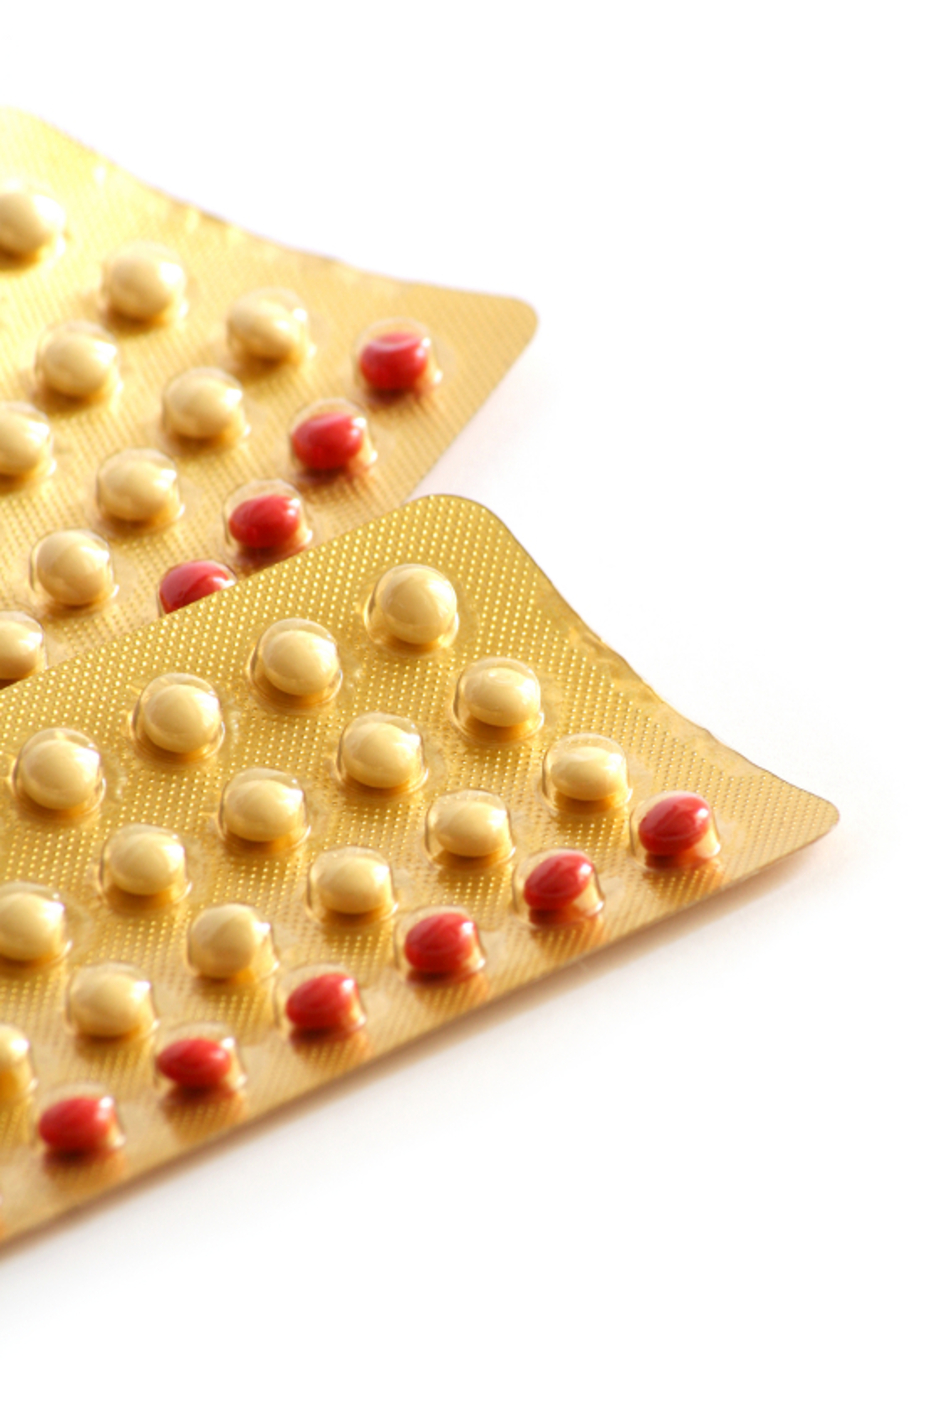 Picking Birth Control: A Highly Personal Choice